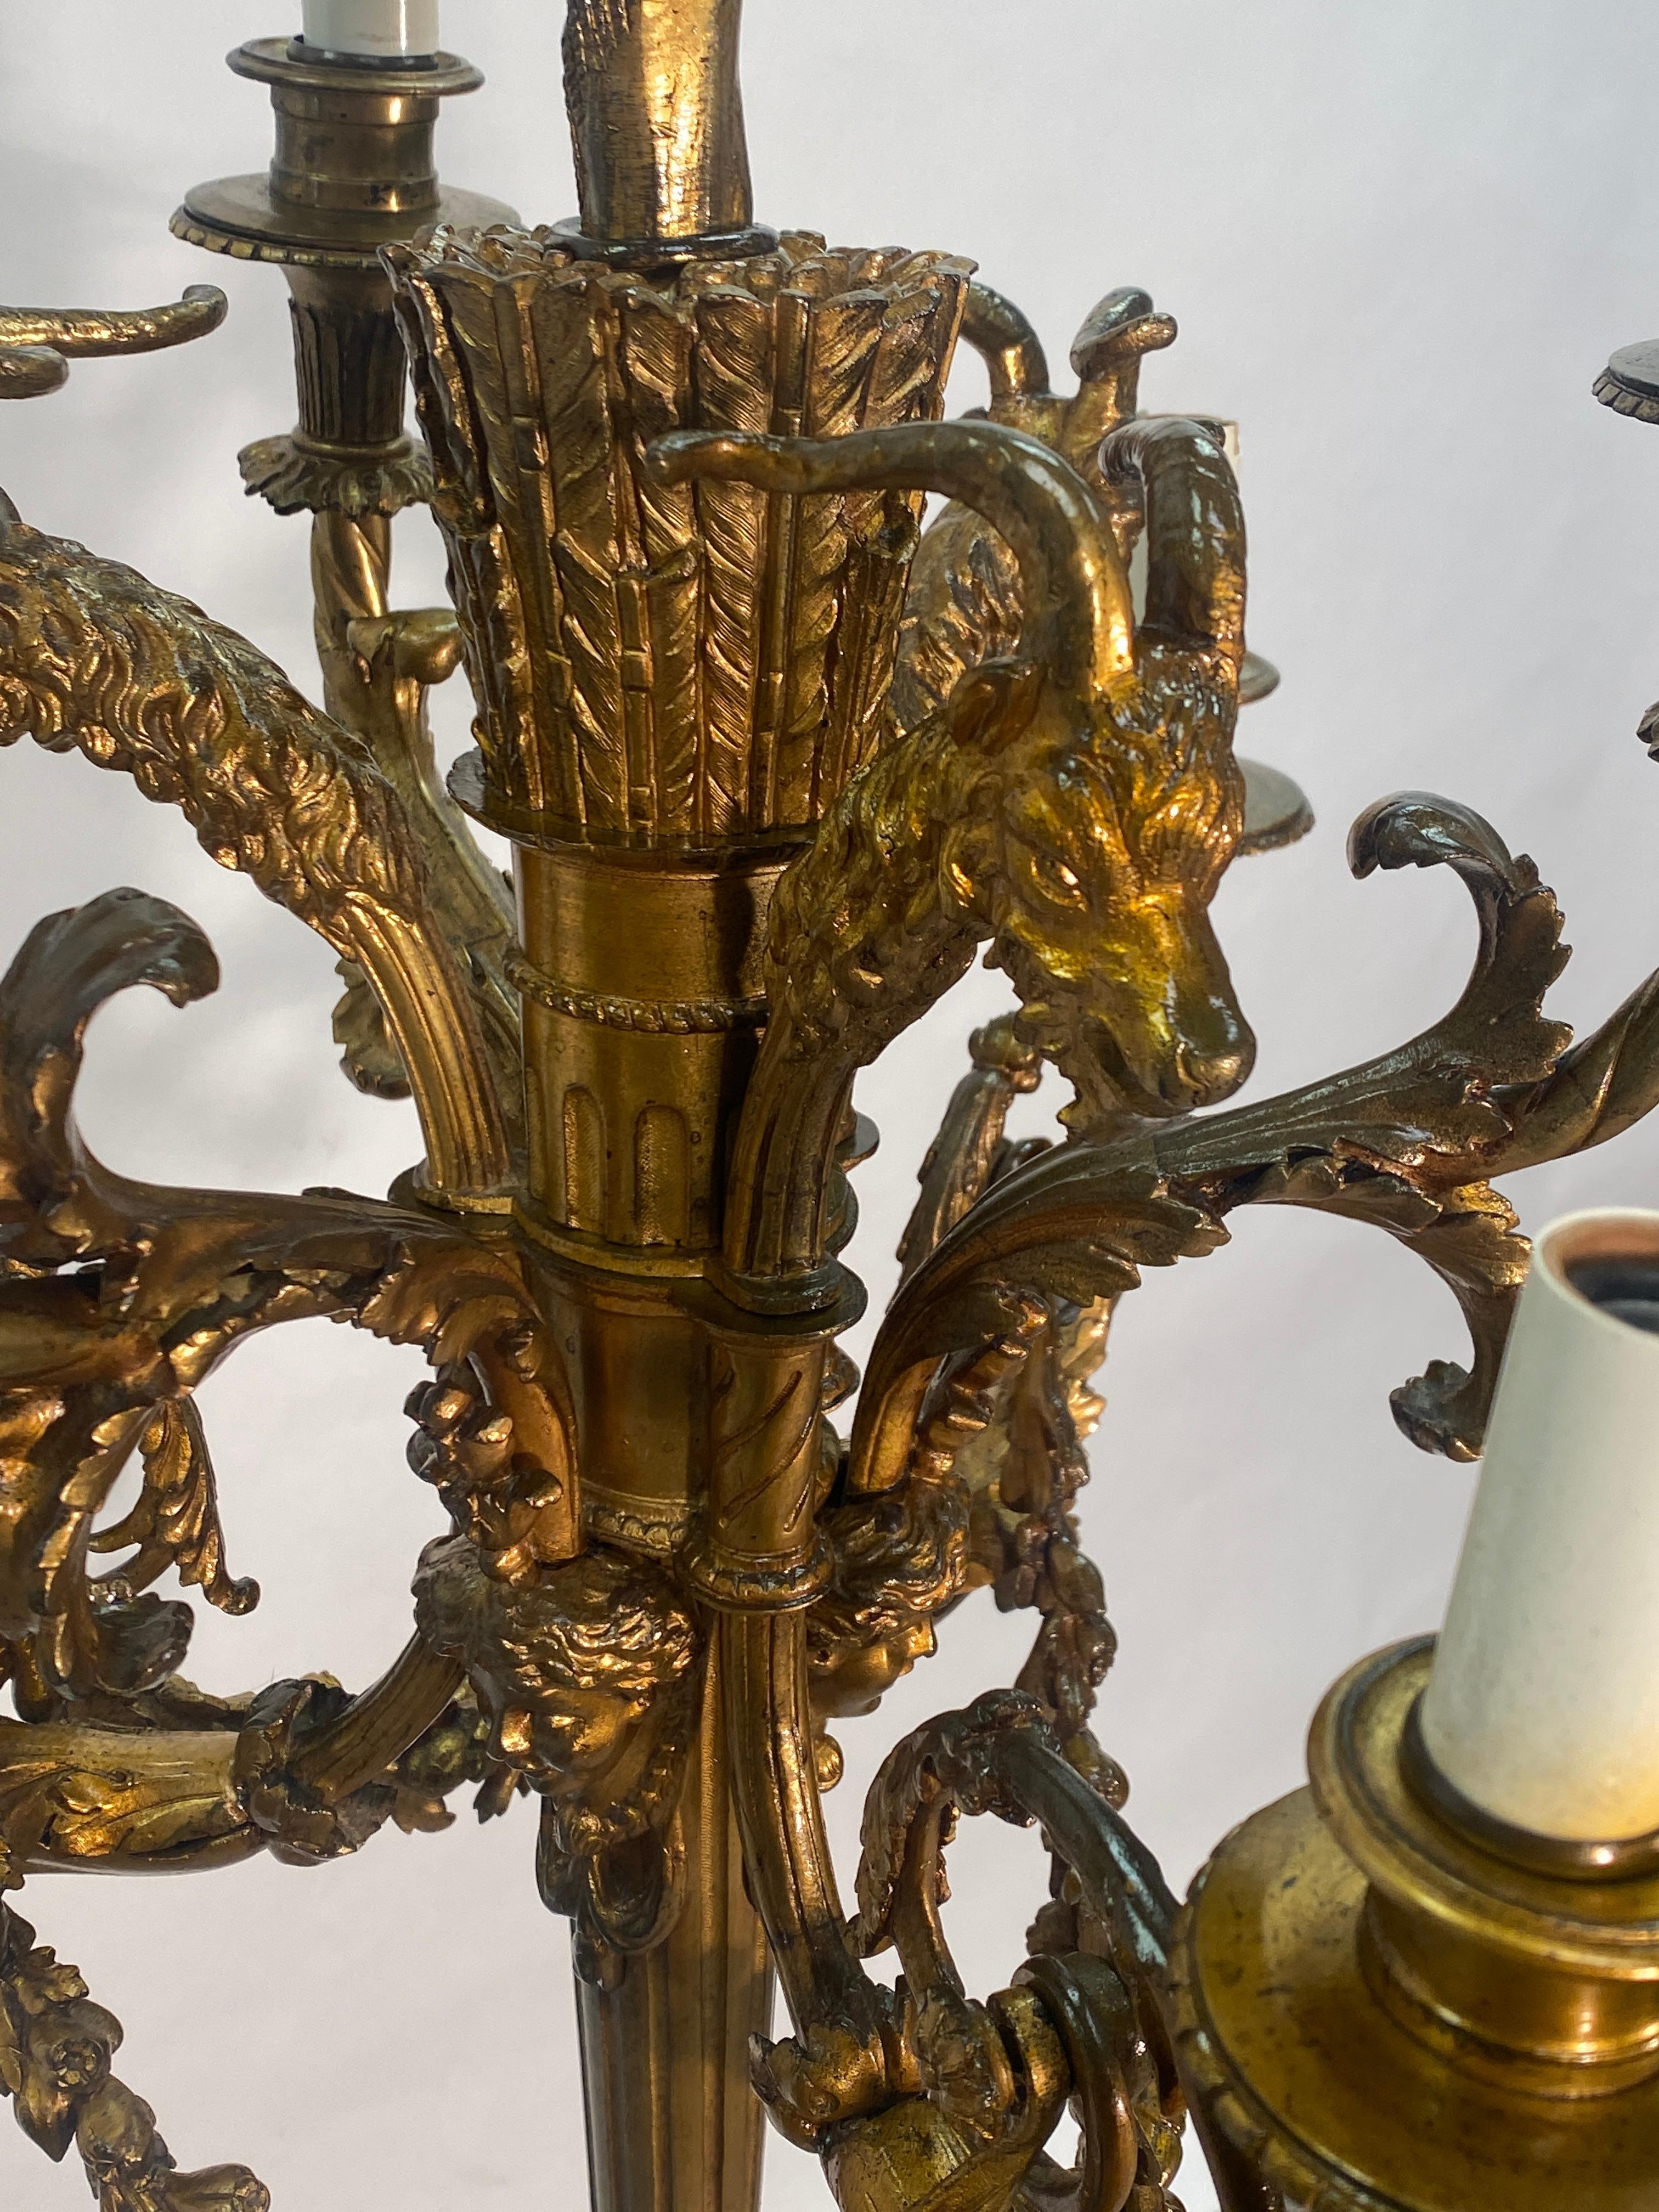 Early 20th century French bronze chandelier in the style of Napoleon III or neoclassical design. Six lights, highly detailed bronze details.